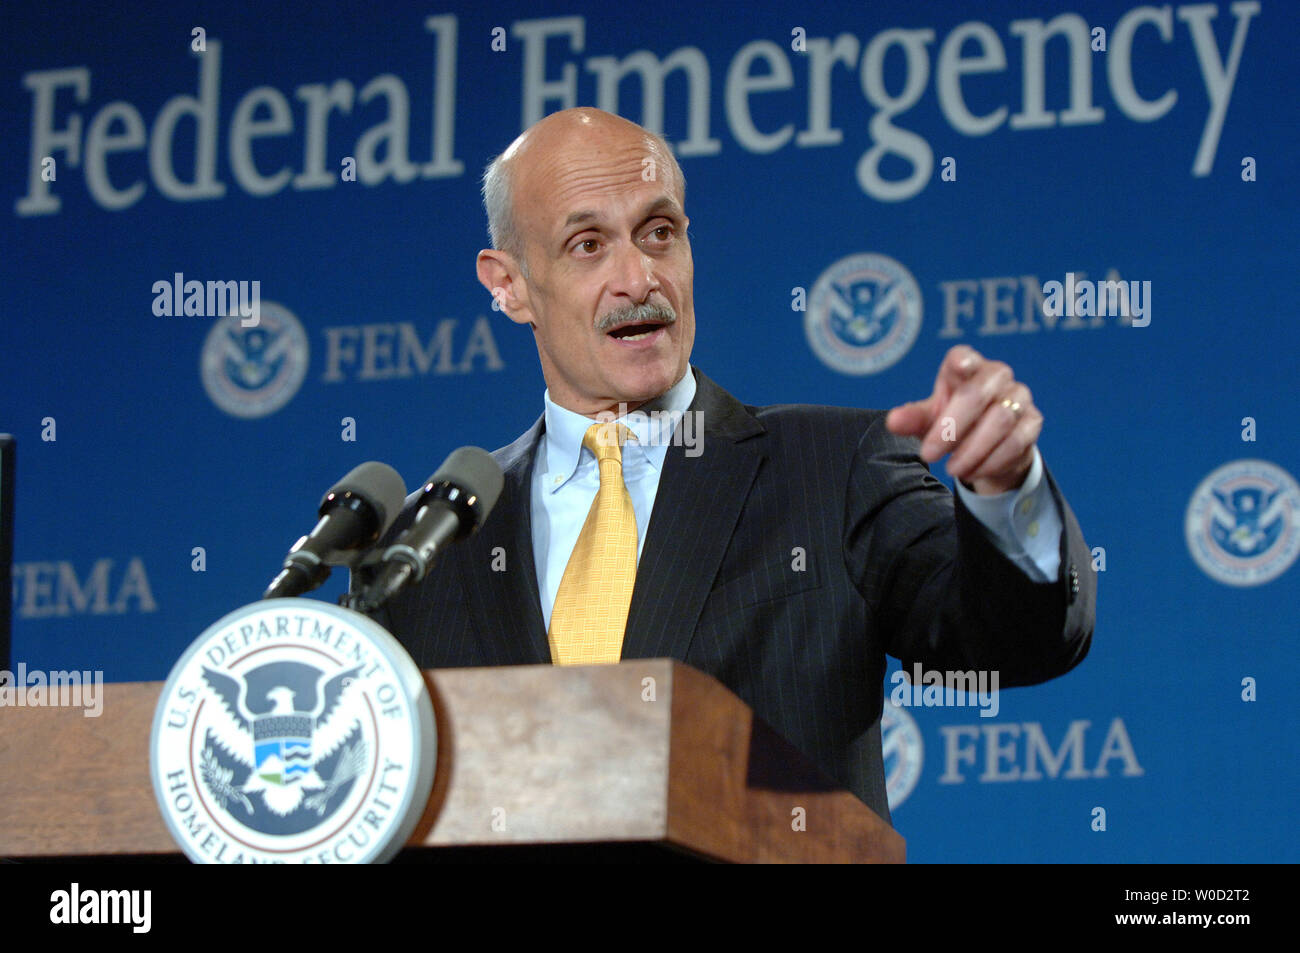 Secretary of Homeland Security Michael Chertoff discusses the hurricane season preparations made by his department, FEMA, other federal agencies and state and local governments during a news conference at FEMA headquarters in Washington on May 23, 2006.   (UPI Photo/Roger L. Wollenberg) Stock Photo